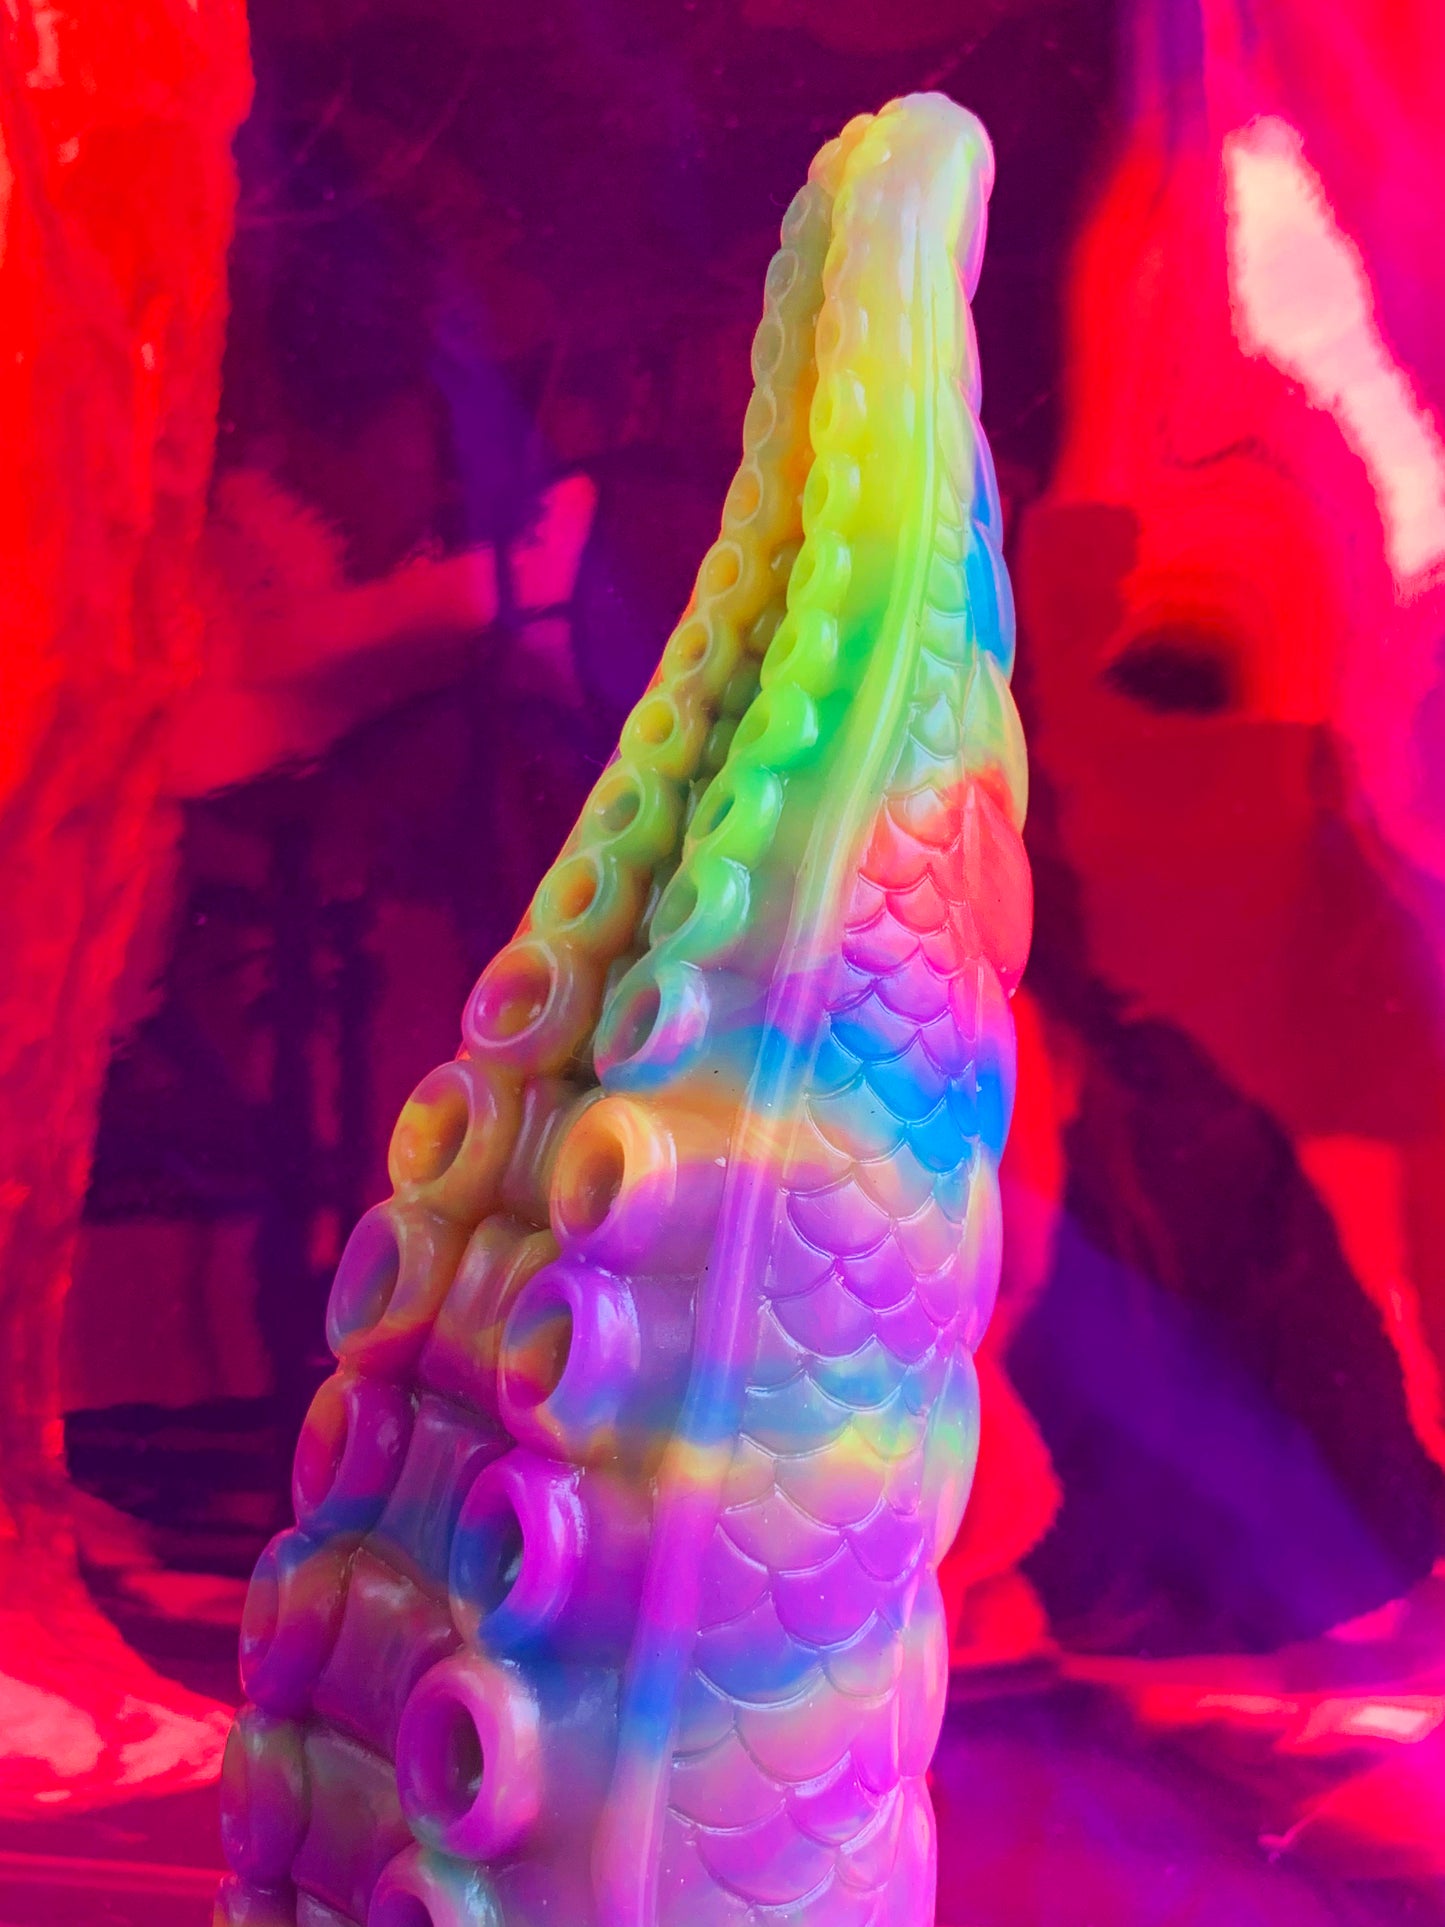 🌈 Rainbow Monster Dildo With Suction Cup 🌈